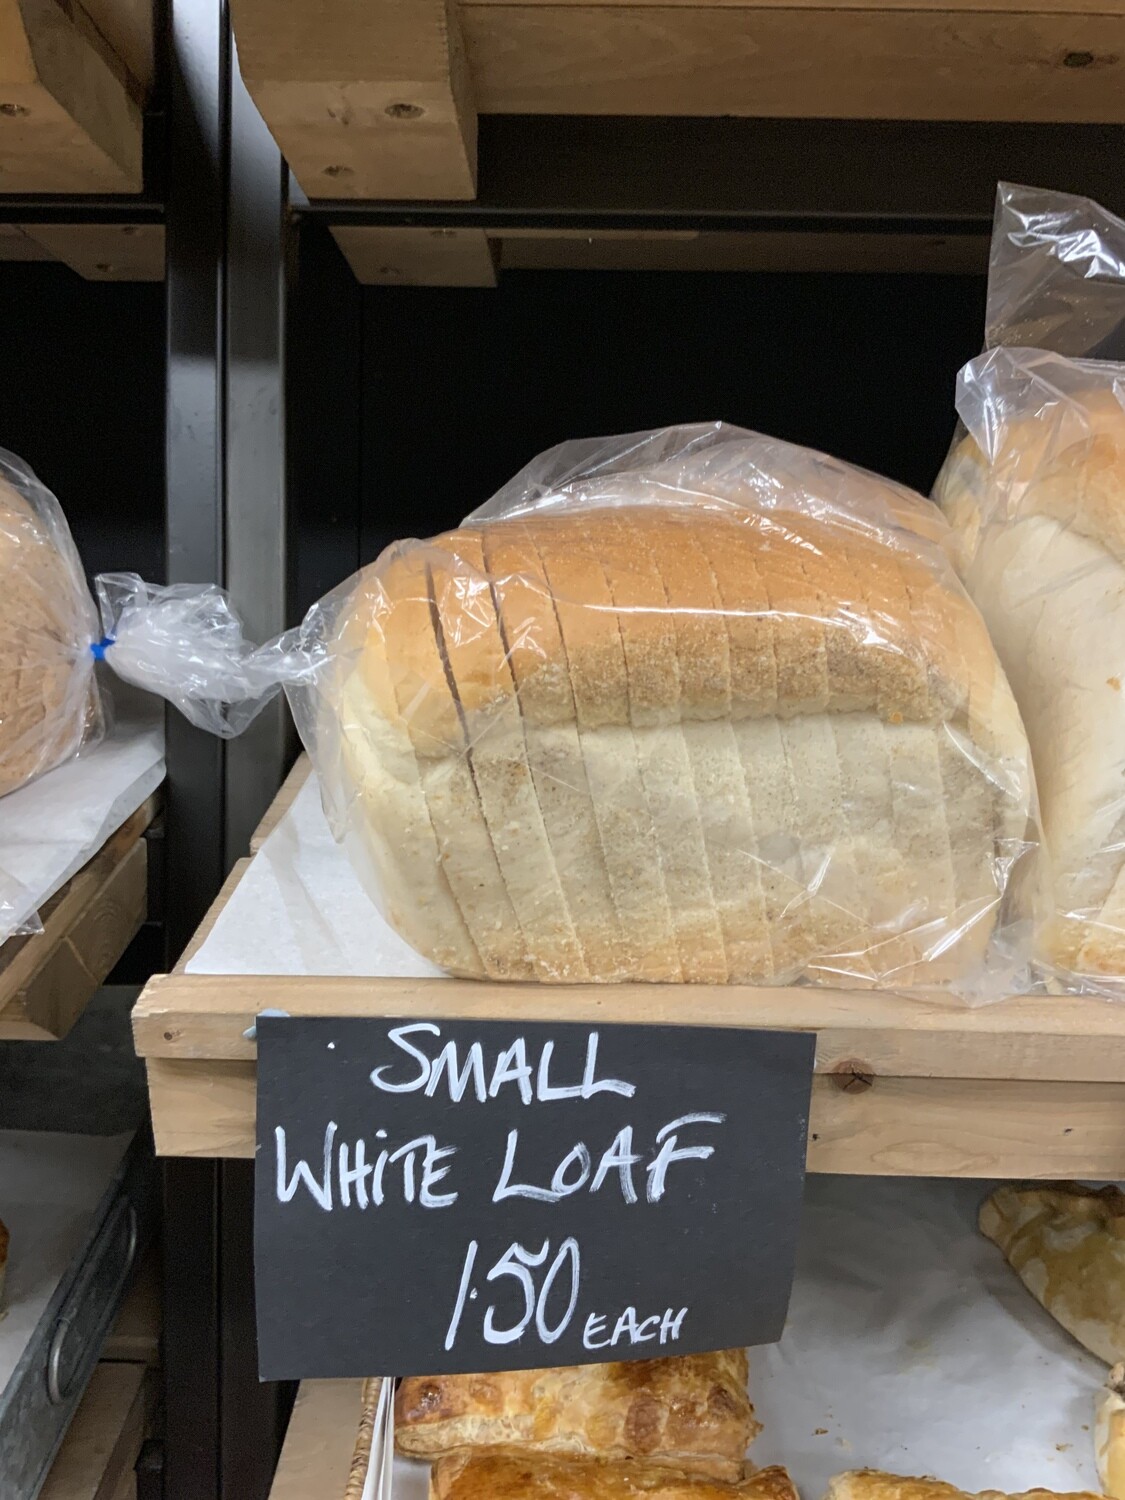 Small White Loaf